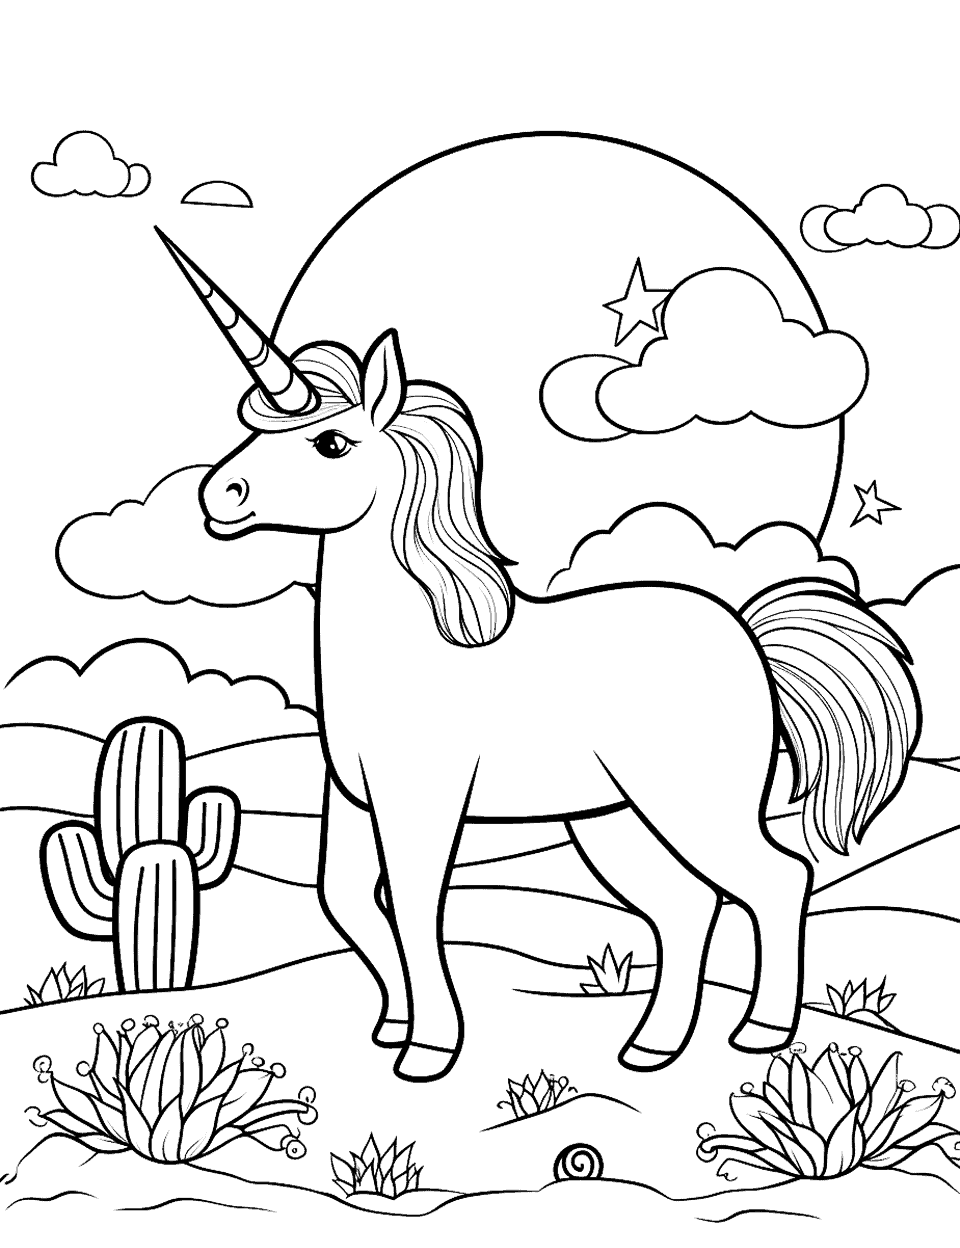 Unicorn and Cactus Coloring Page - A desert scene with a unicorn and cacti, with a setting sun in the background.